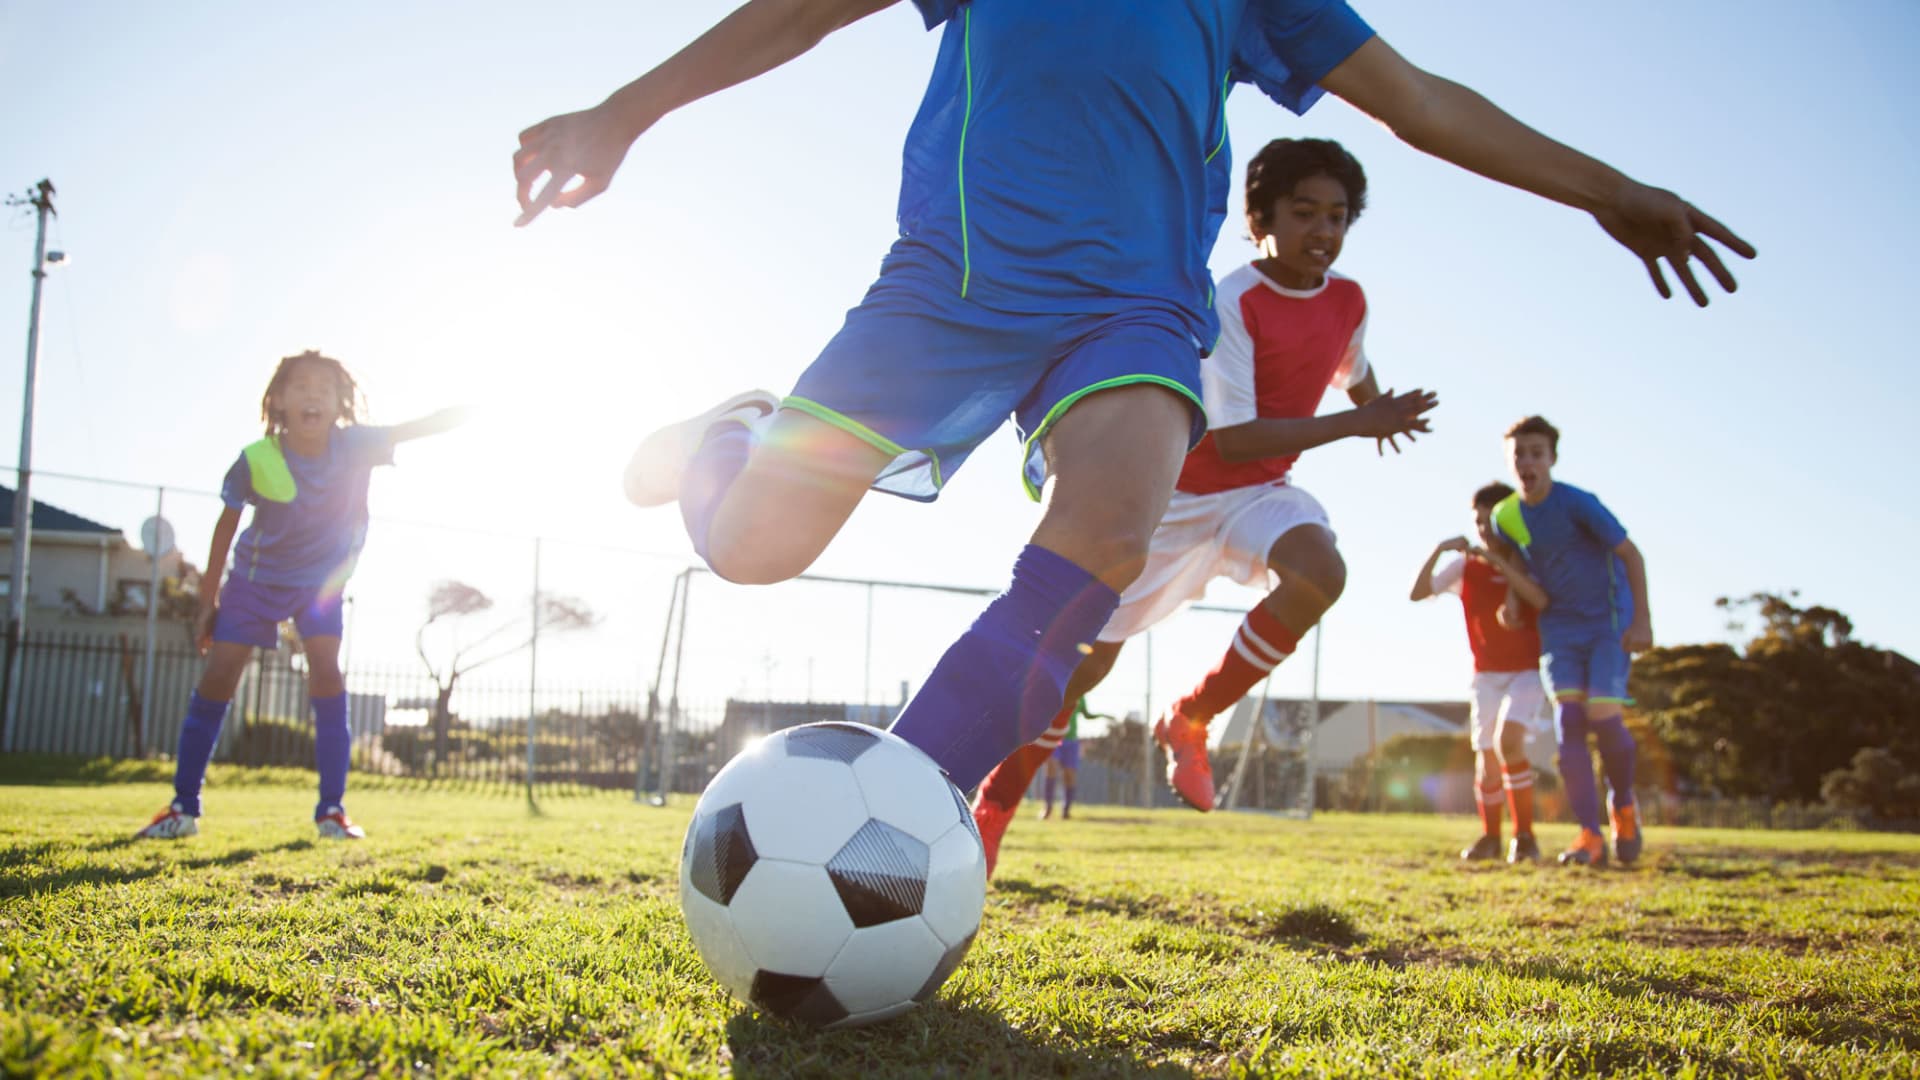 Nearly 60% of families say youth sports are a 'financial strain'